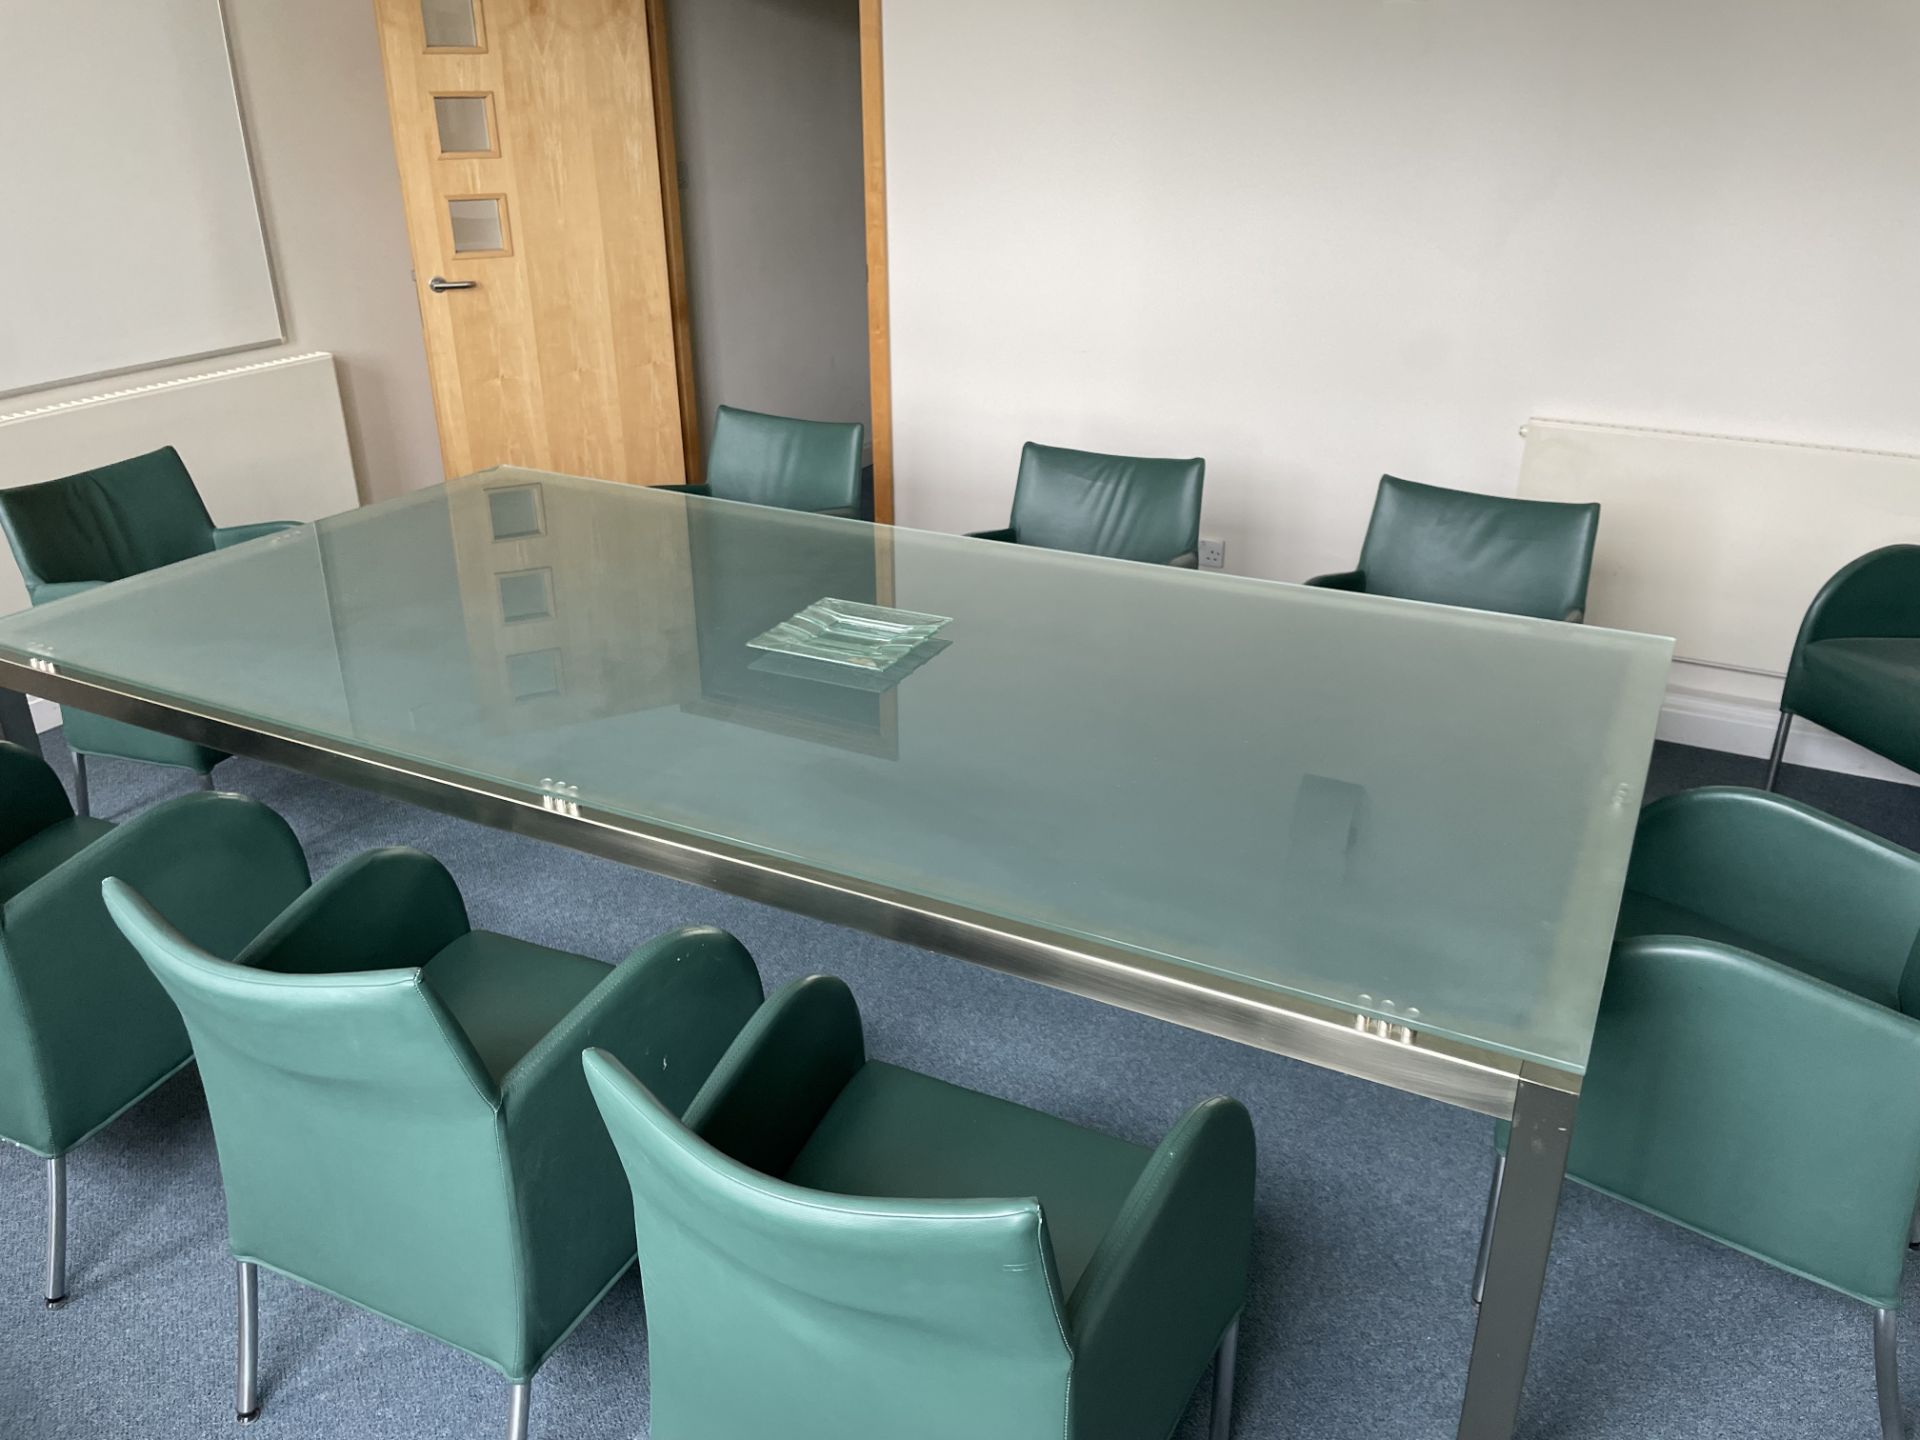 Boardroom table with 10 chairs (without contents) - Image 10 of 14